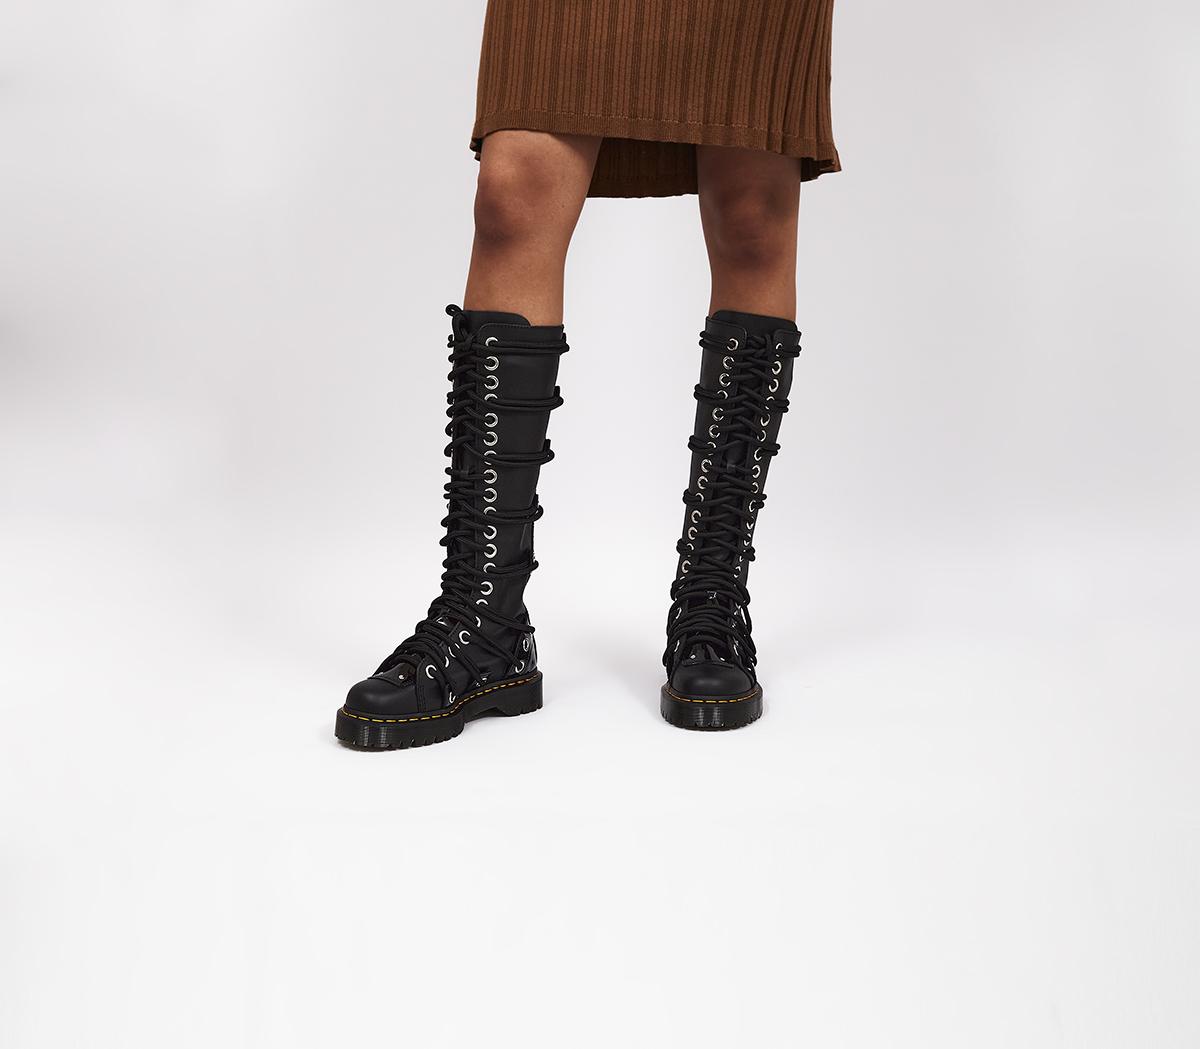 DR MARTENS Daria Bex Lace Up Leather Boots